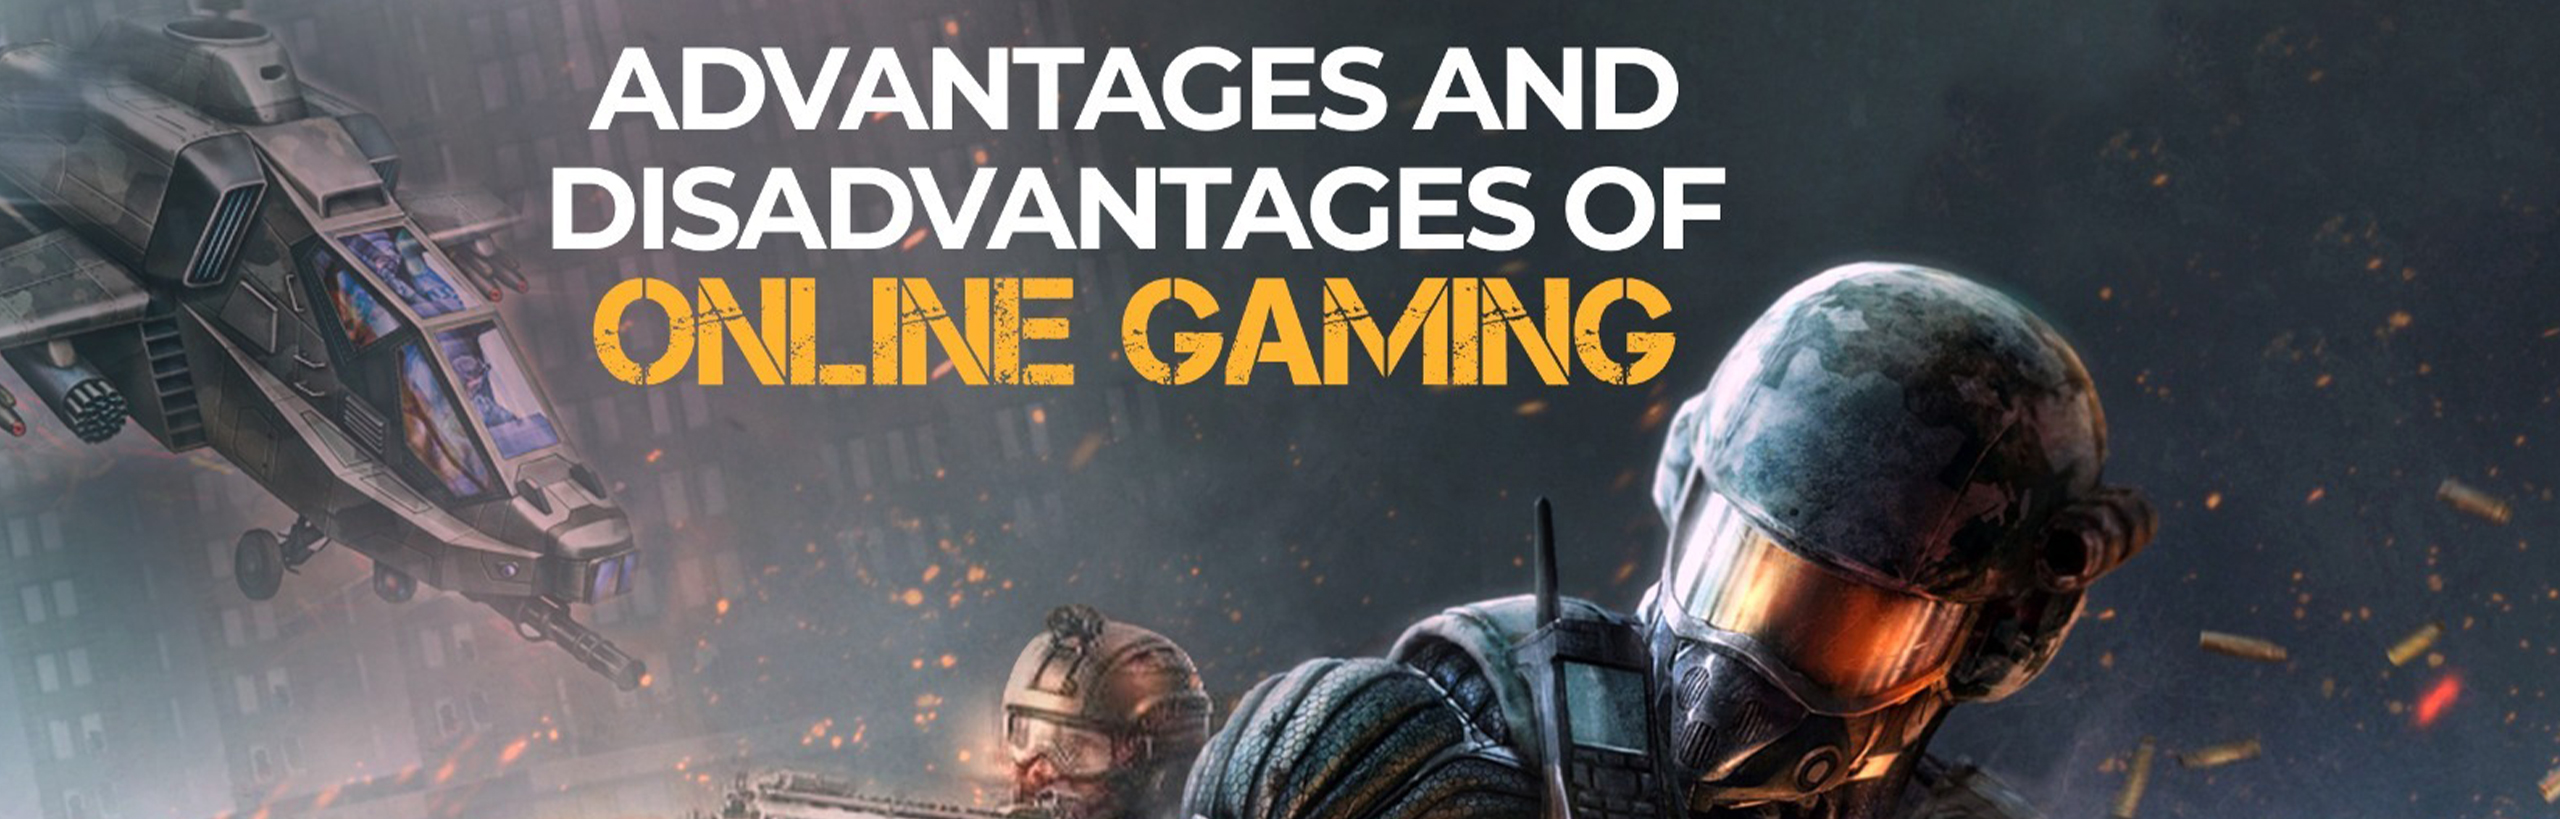 Advantages and disadvantages of online gaming